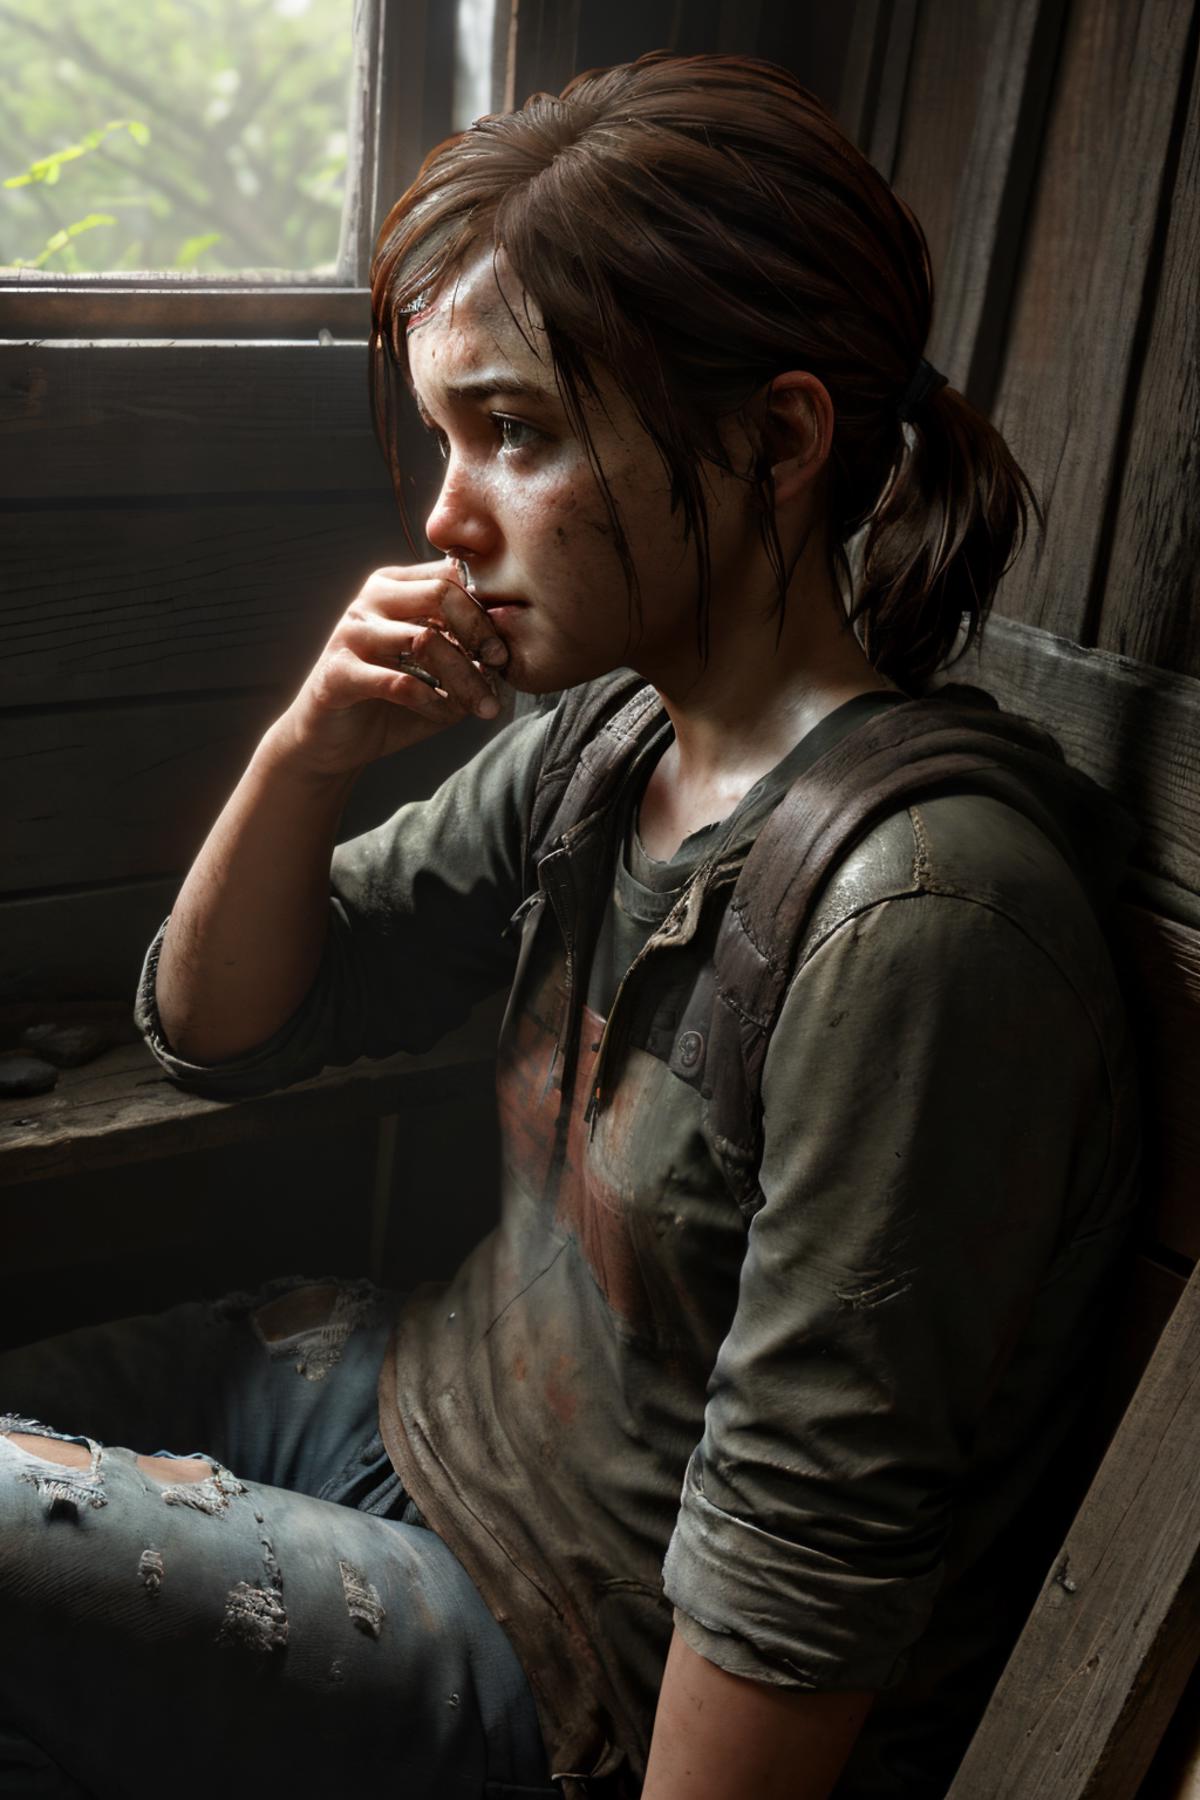 Ellie from The Last of Us image by Duomiedo